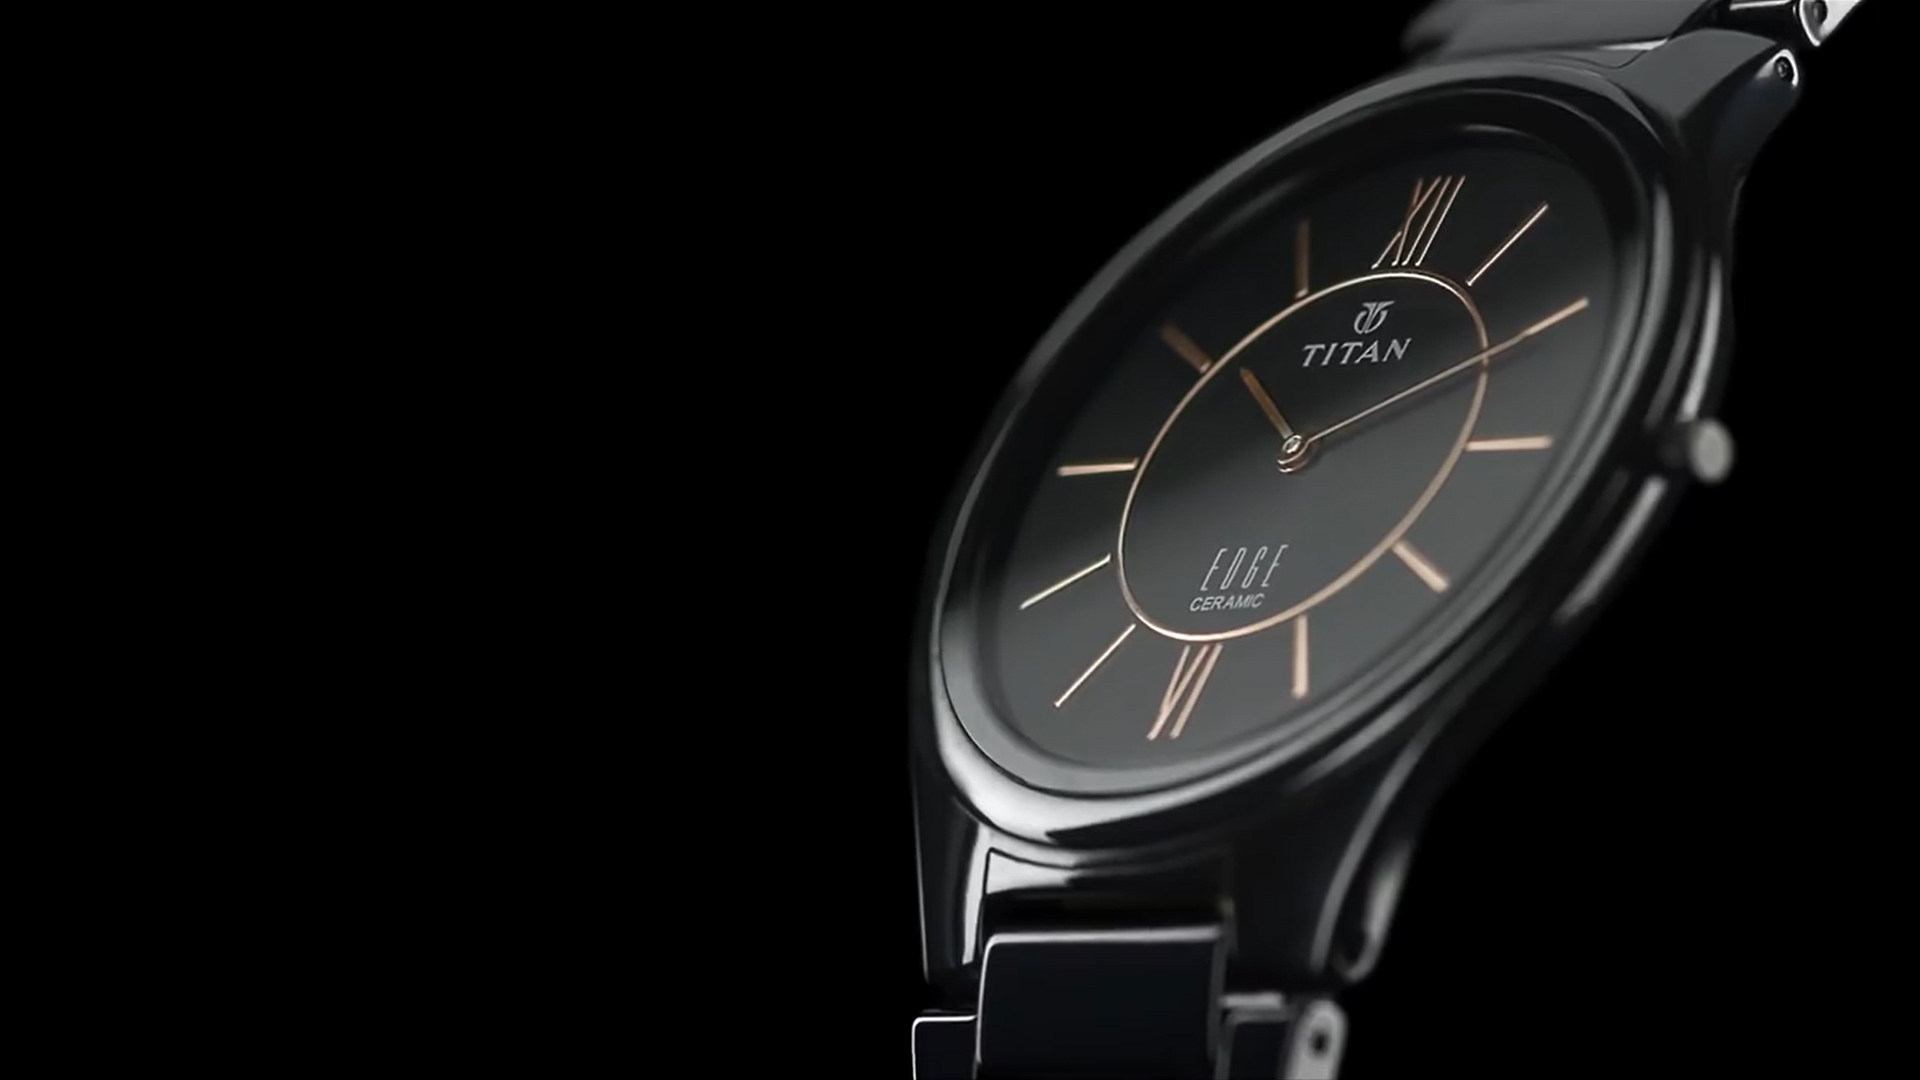 The Slimmest Watch In the Universe - Titan Edge